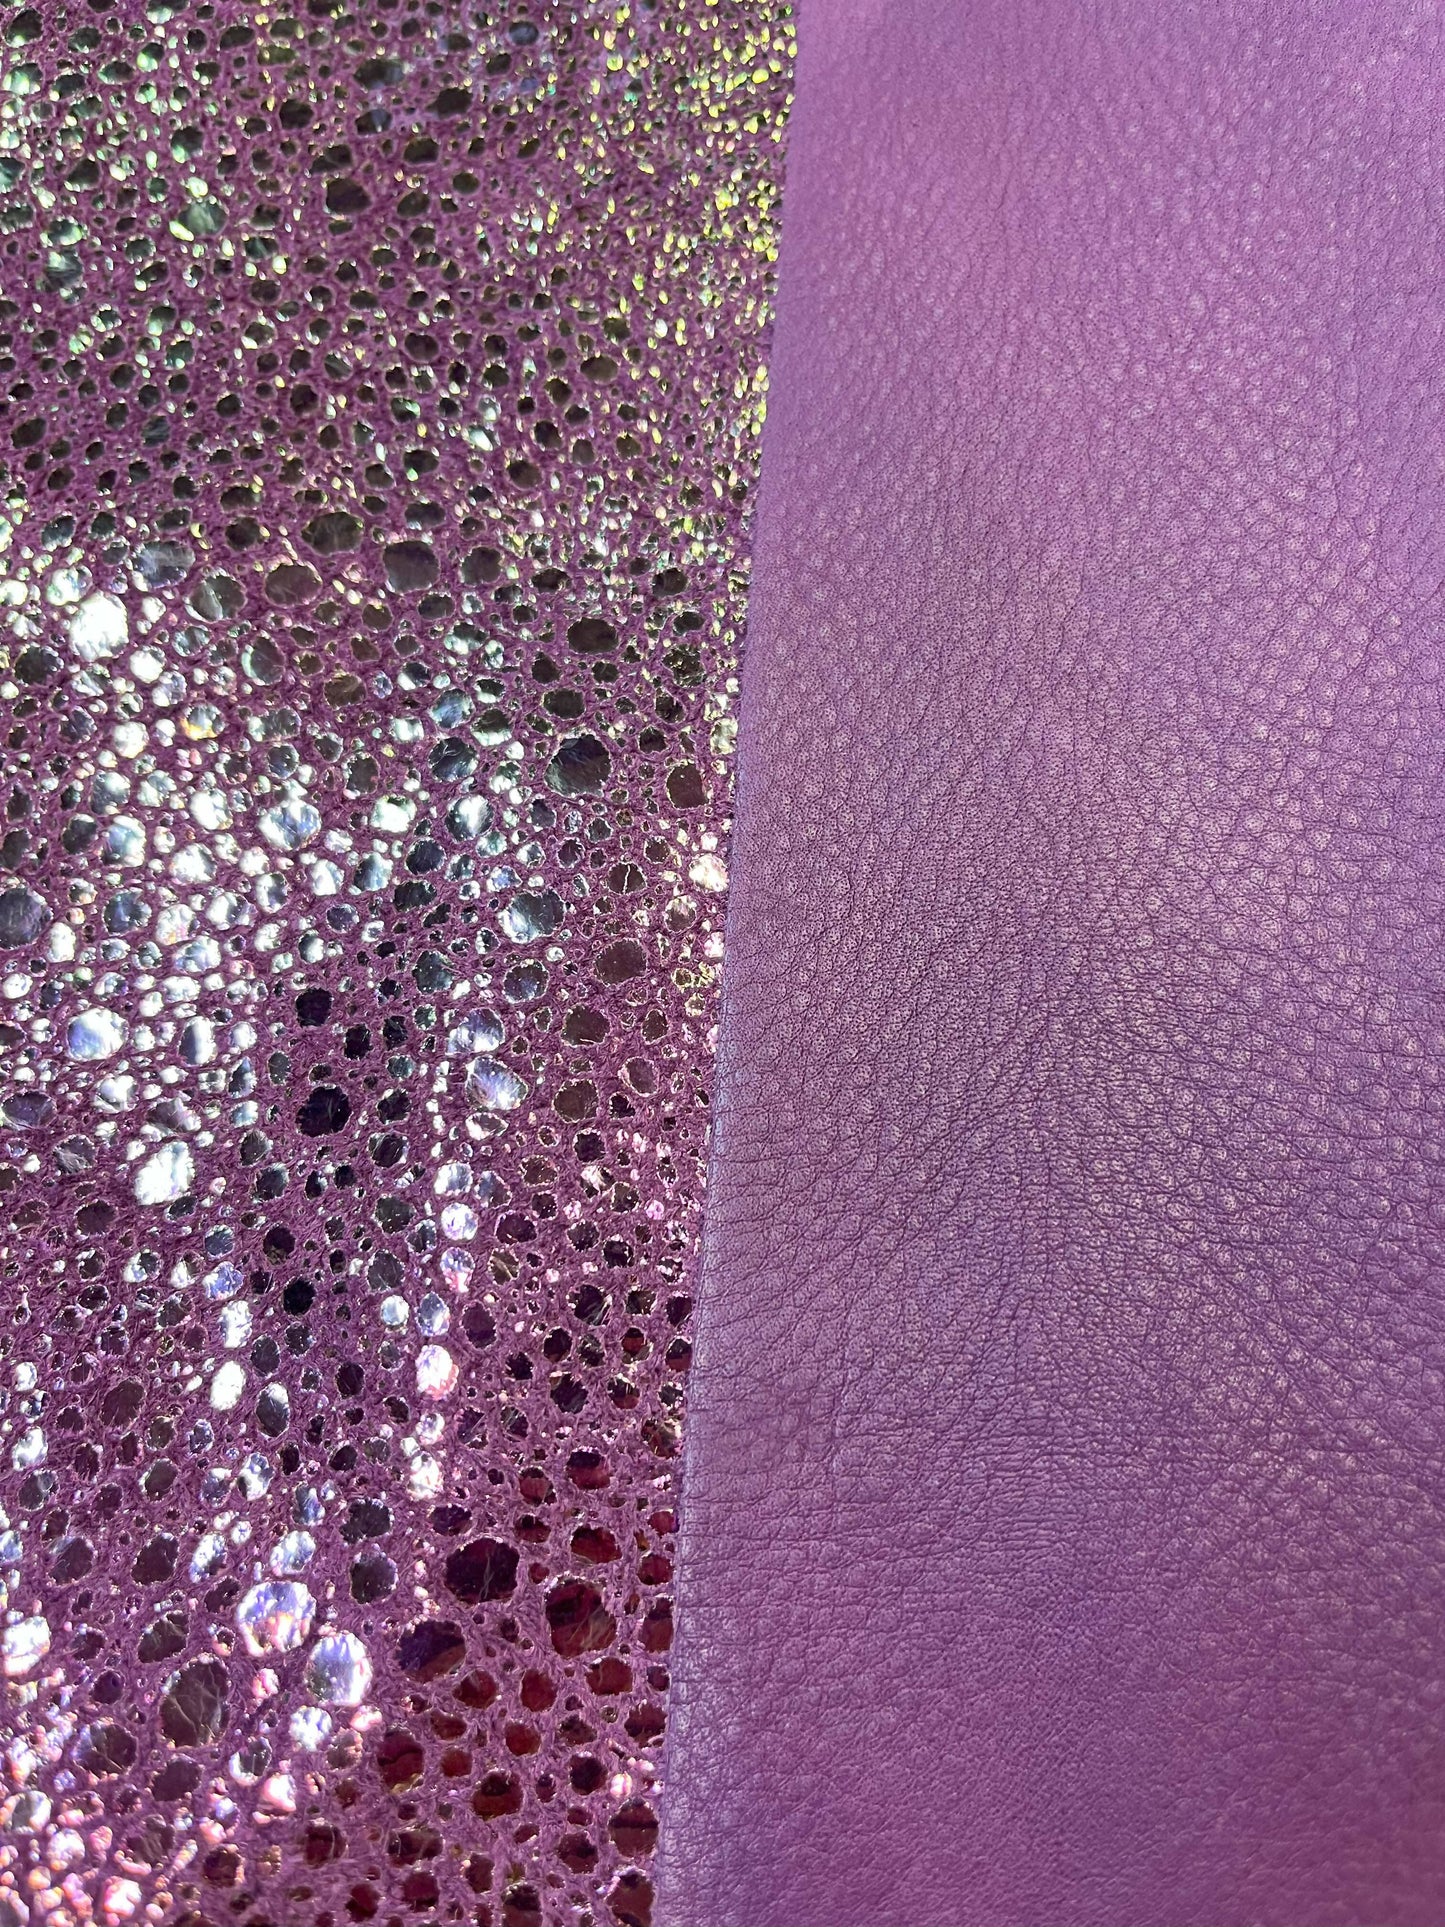 Metallic Iridescent Frog Spots on Grape Cowhide Leather